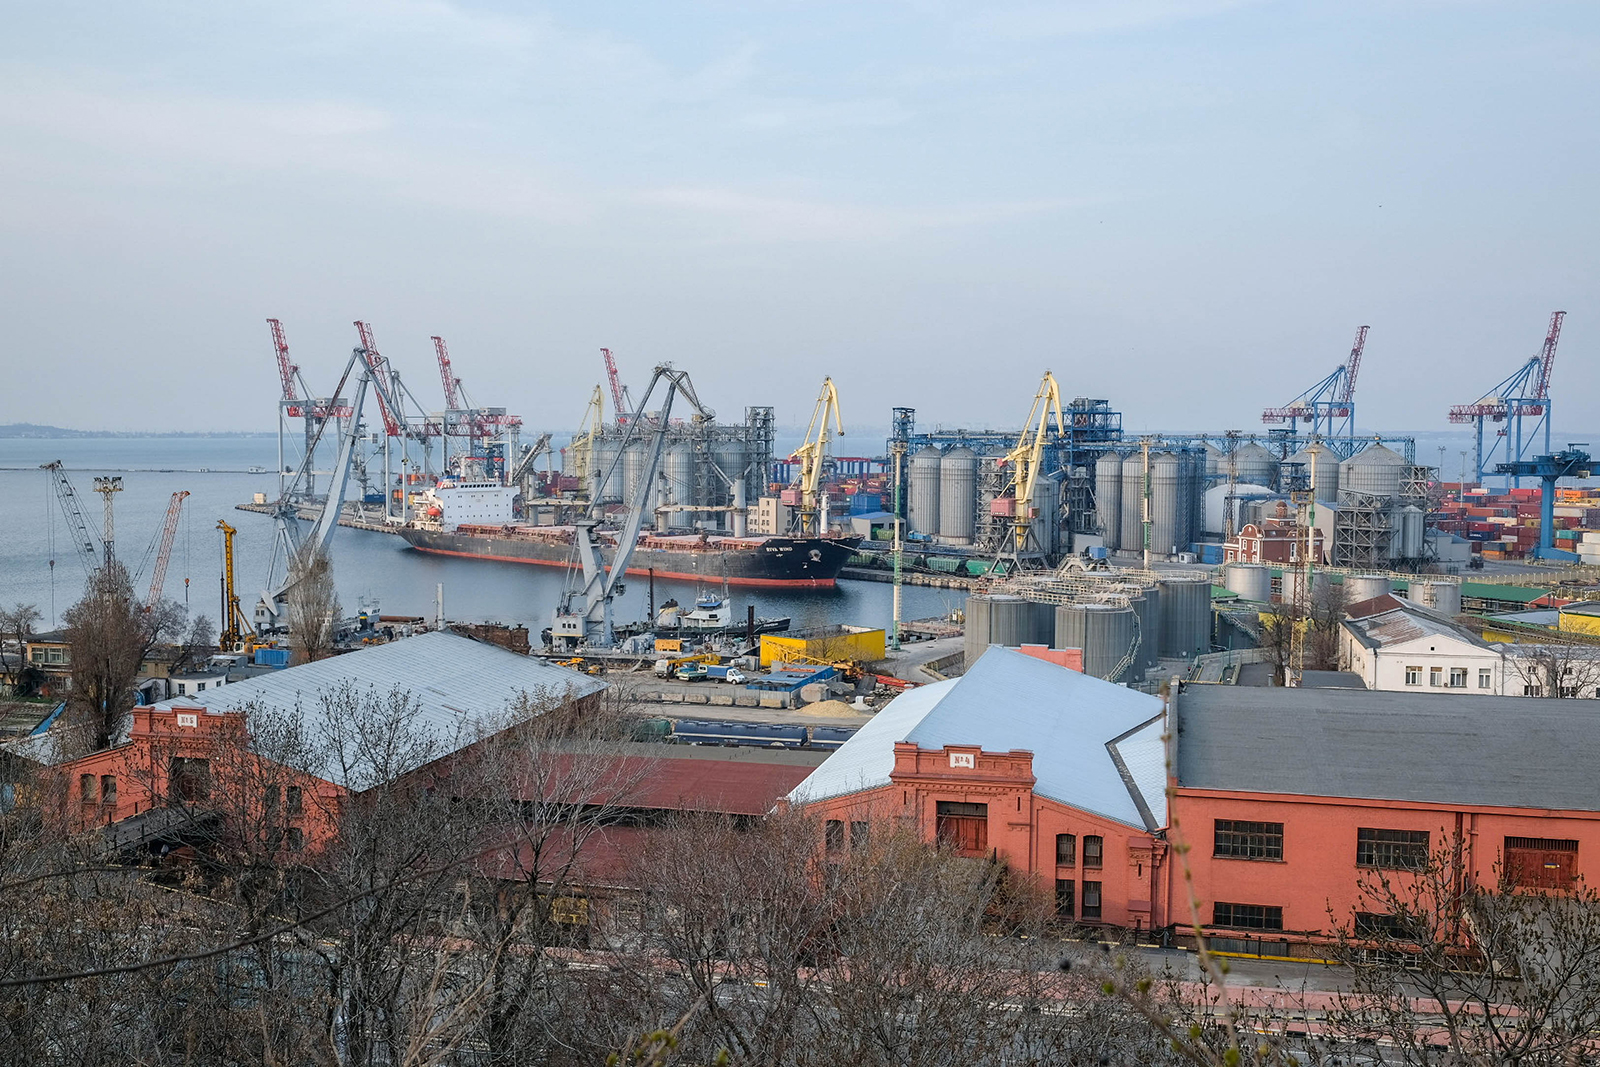 Odesa's port stands on the shore of the Odessa Gulf of the Black Sea and is the largest commercial sea port of Ukraine, pictured on March 30.